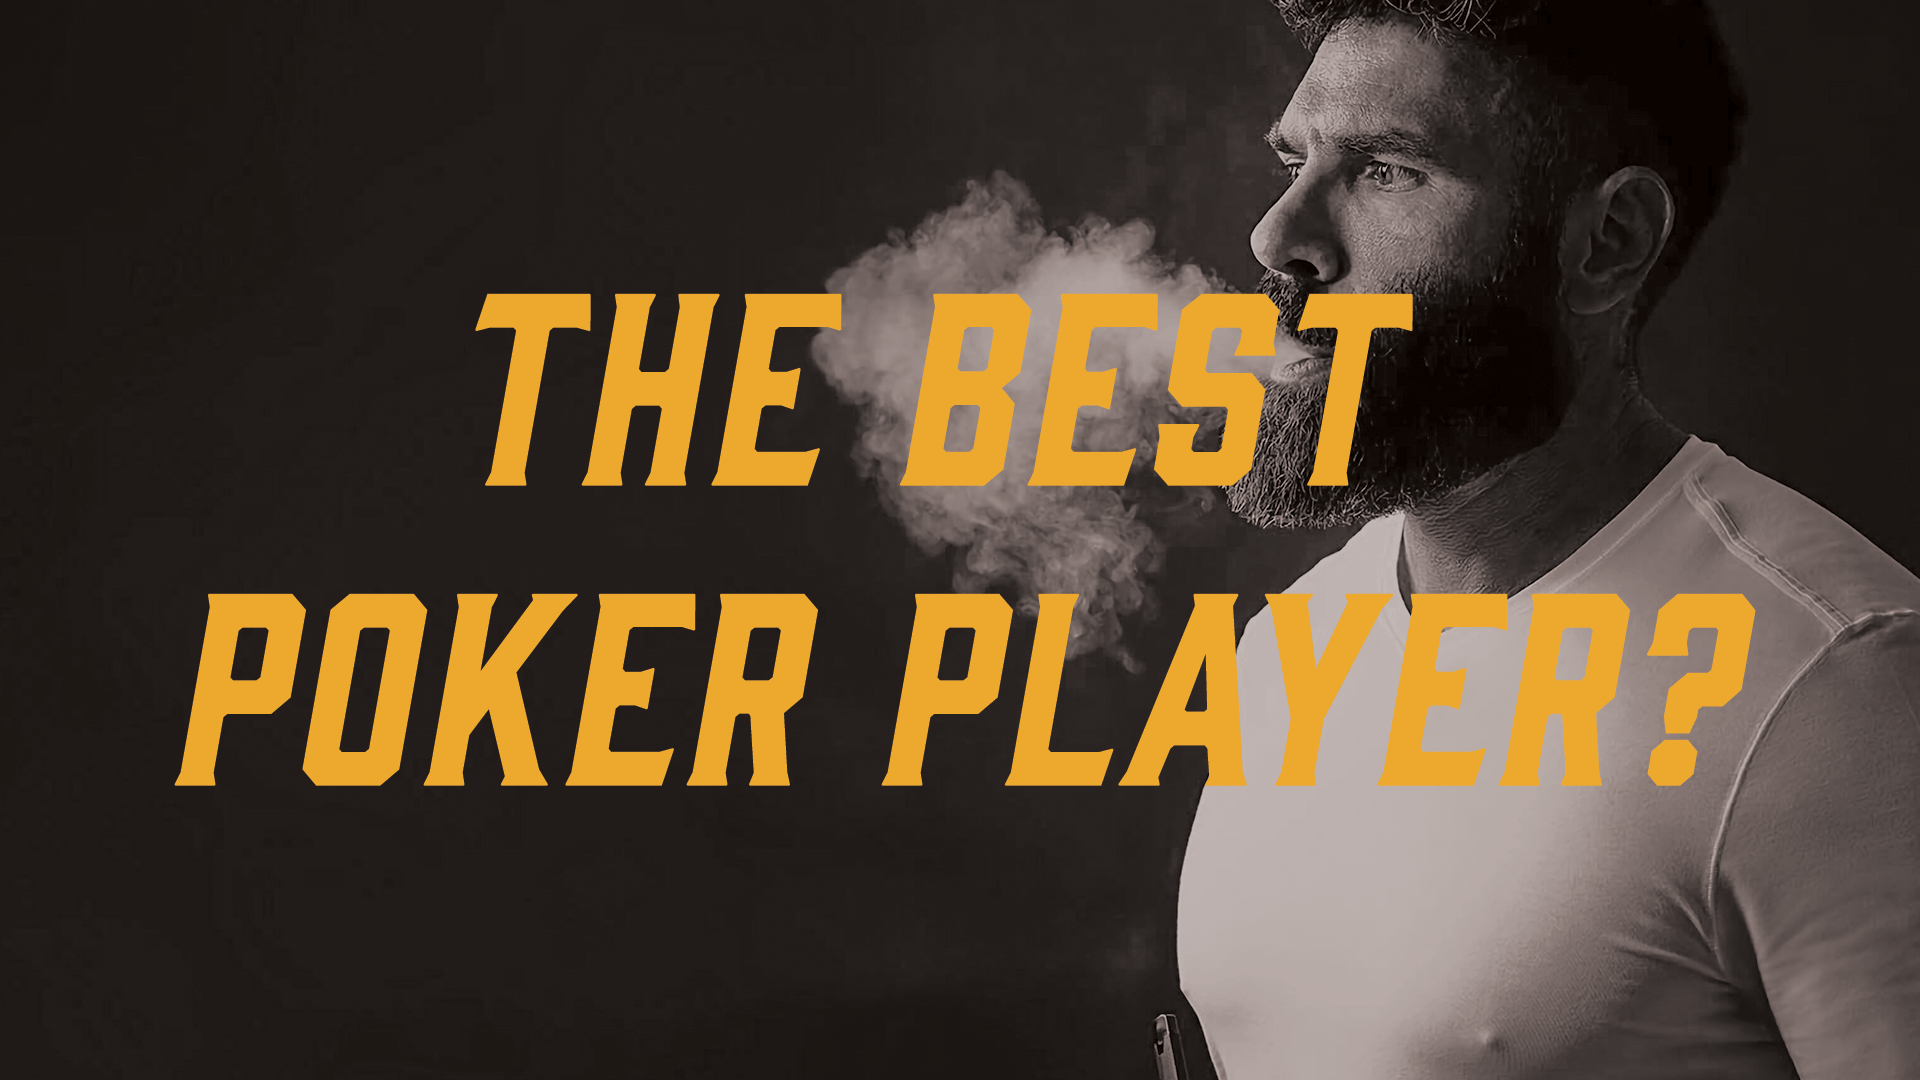 Who Is Considered The Best Poker Player In The World?